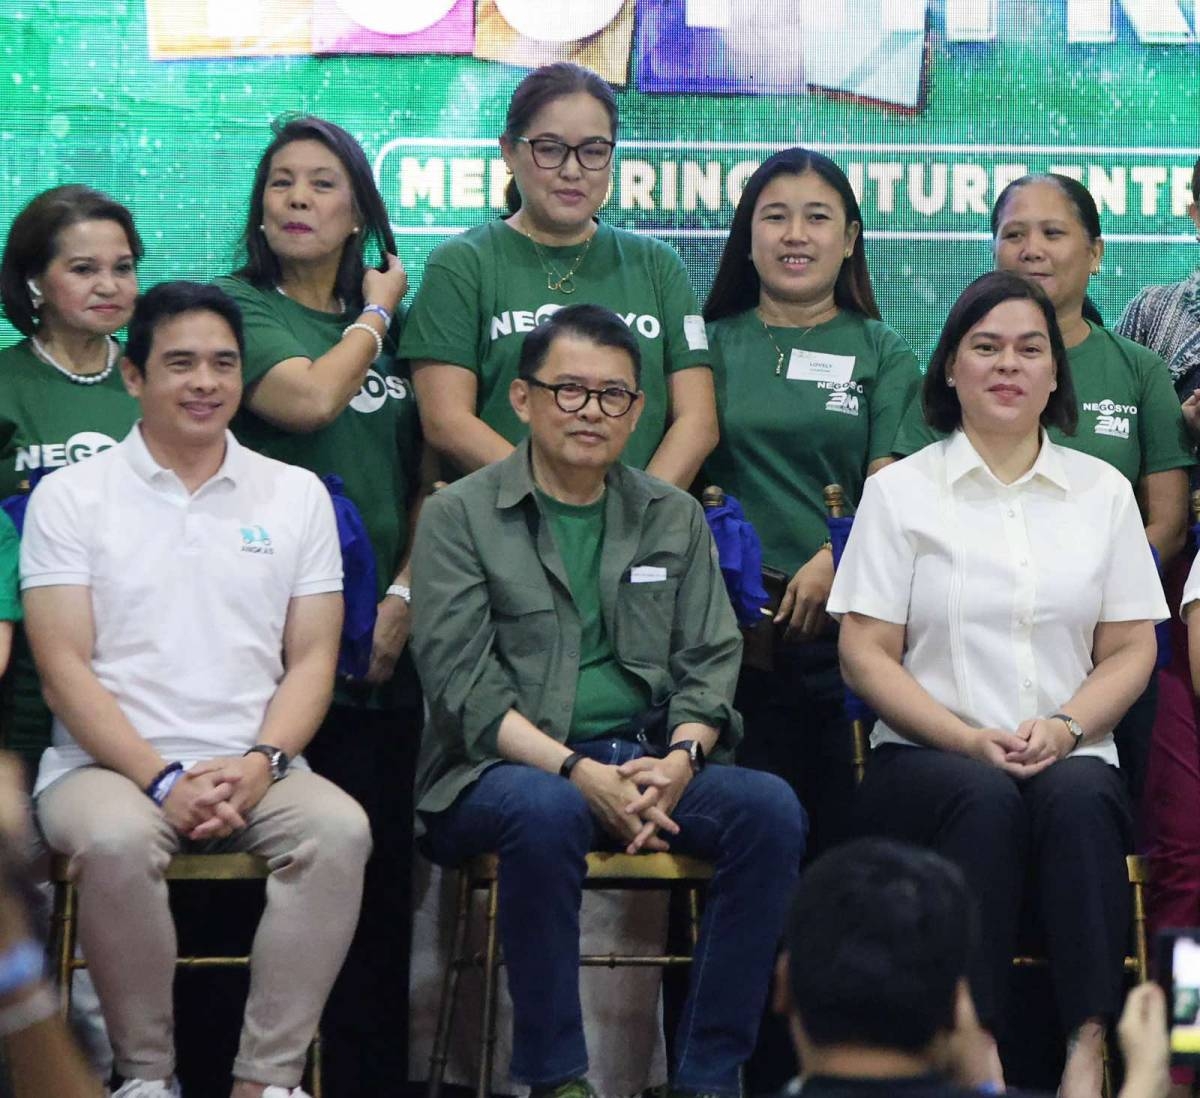 Vice President Sara Duterte-Carpio poses with Go Negosyo Founder Joey Concepcion during the Youthpreneur at the Rizal High School in Pasig City. Youthpreneur is a joint project of the Department of Education and Go Negosyo that aims to teach young Filipinos entrepreneurship. PHOTOS BY ISMAEL DE JUAN